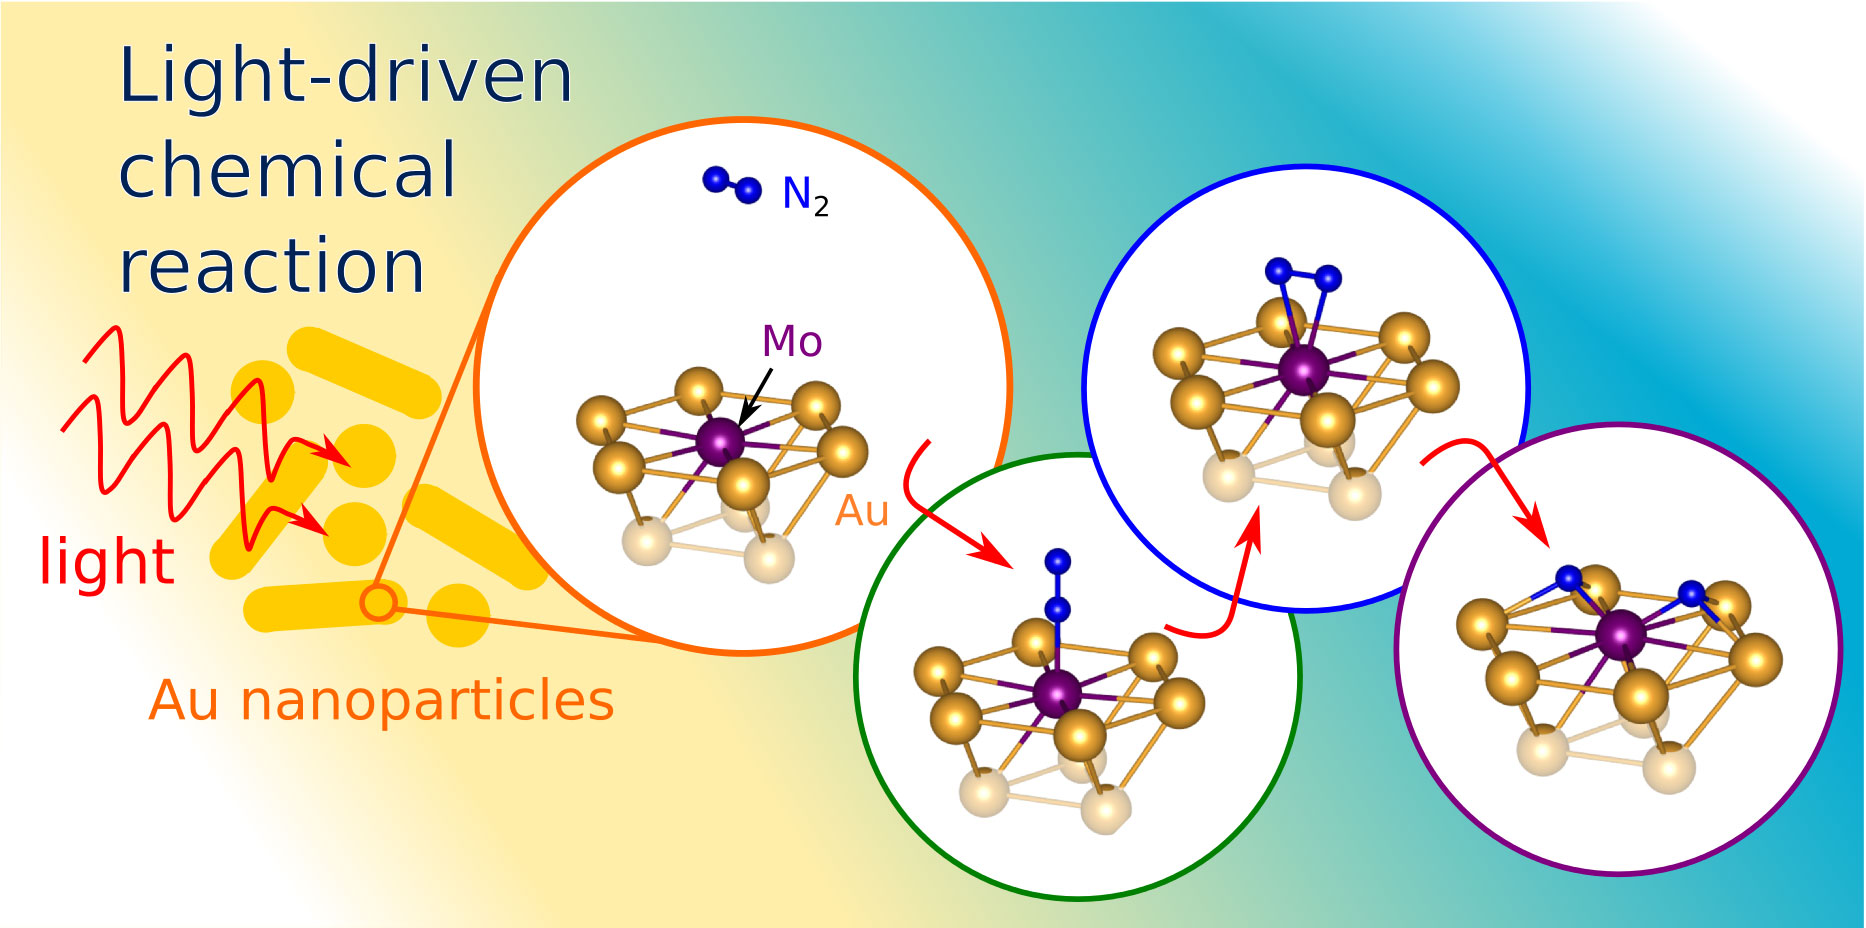 Nanostructures made from gold concentrate light energy and boost molybdenum's ability to pull apart the two nitrogen atoms in an N2 molecule (illustration by the researchers)